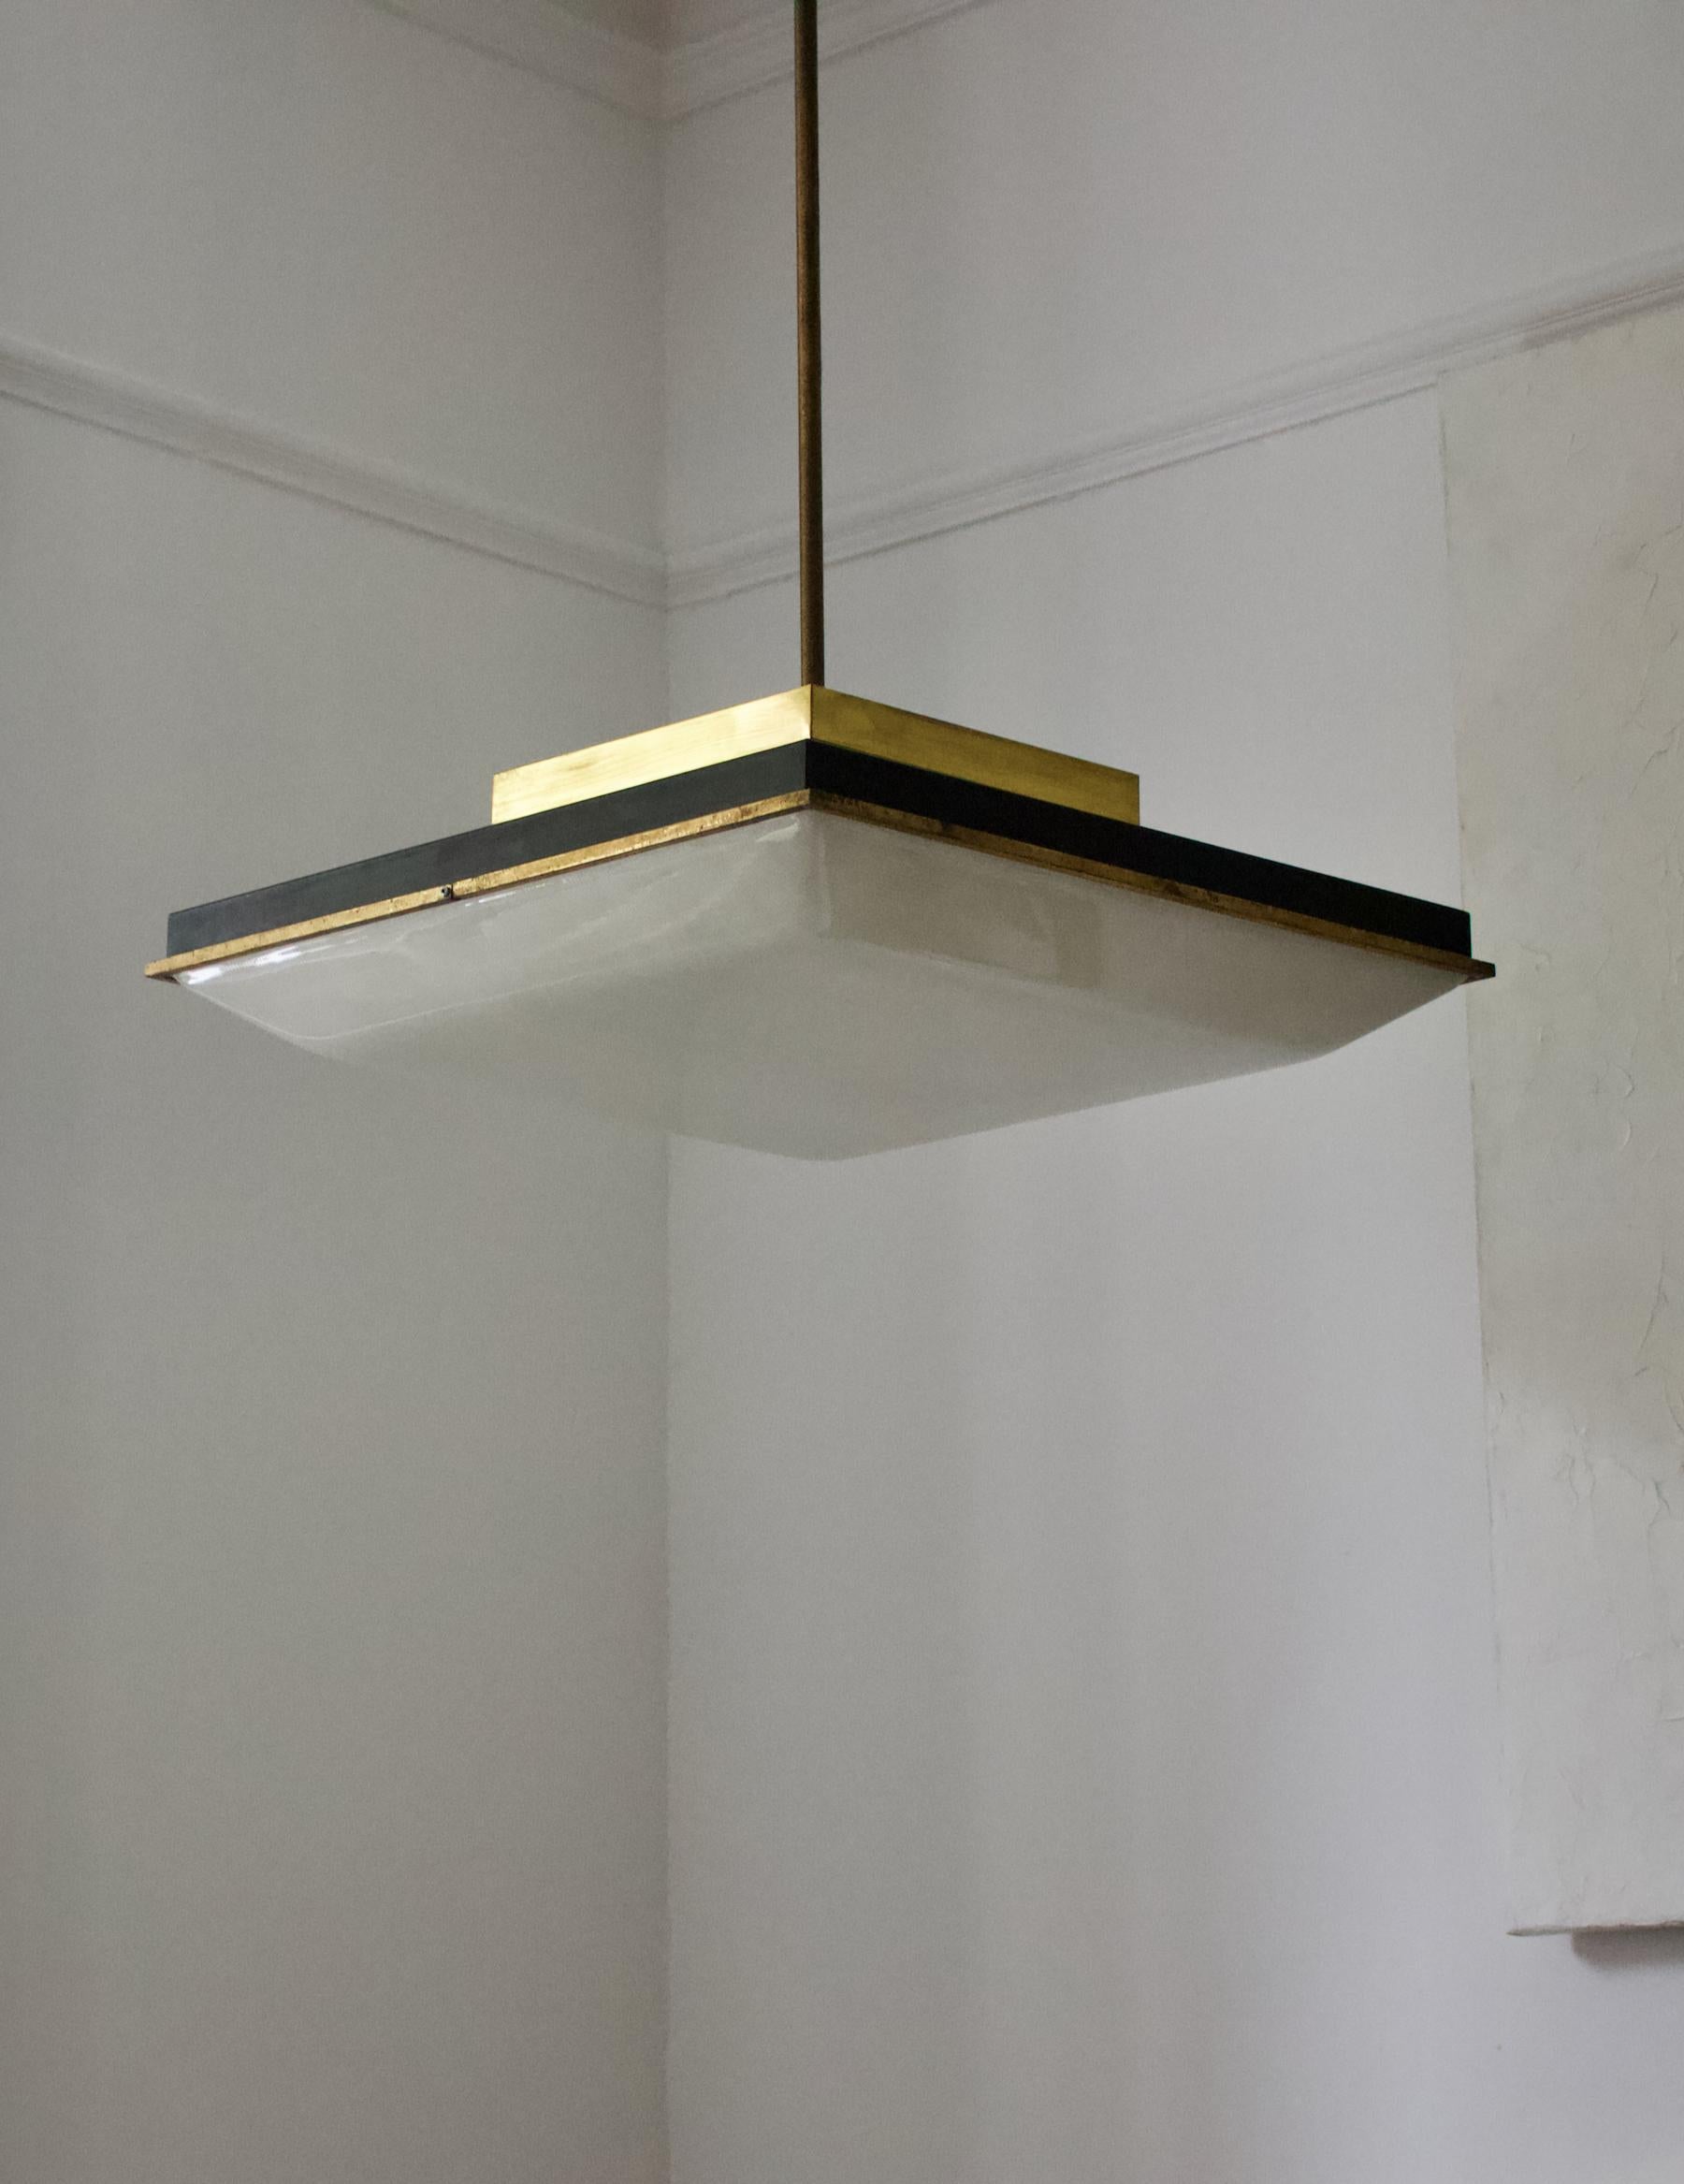 Italian Square Ceiling Pendant with Brass Details Attributed to Stilnovo, Italy